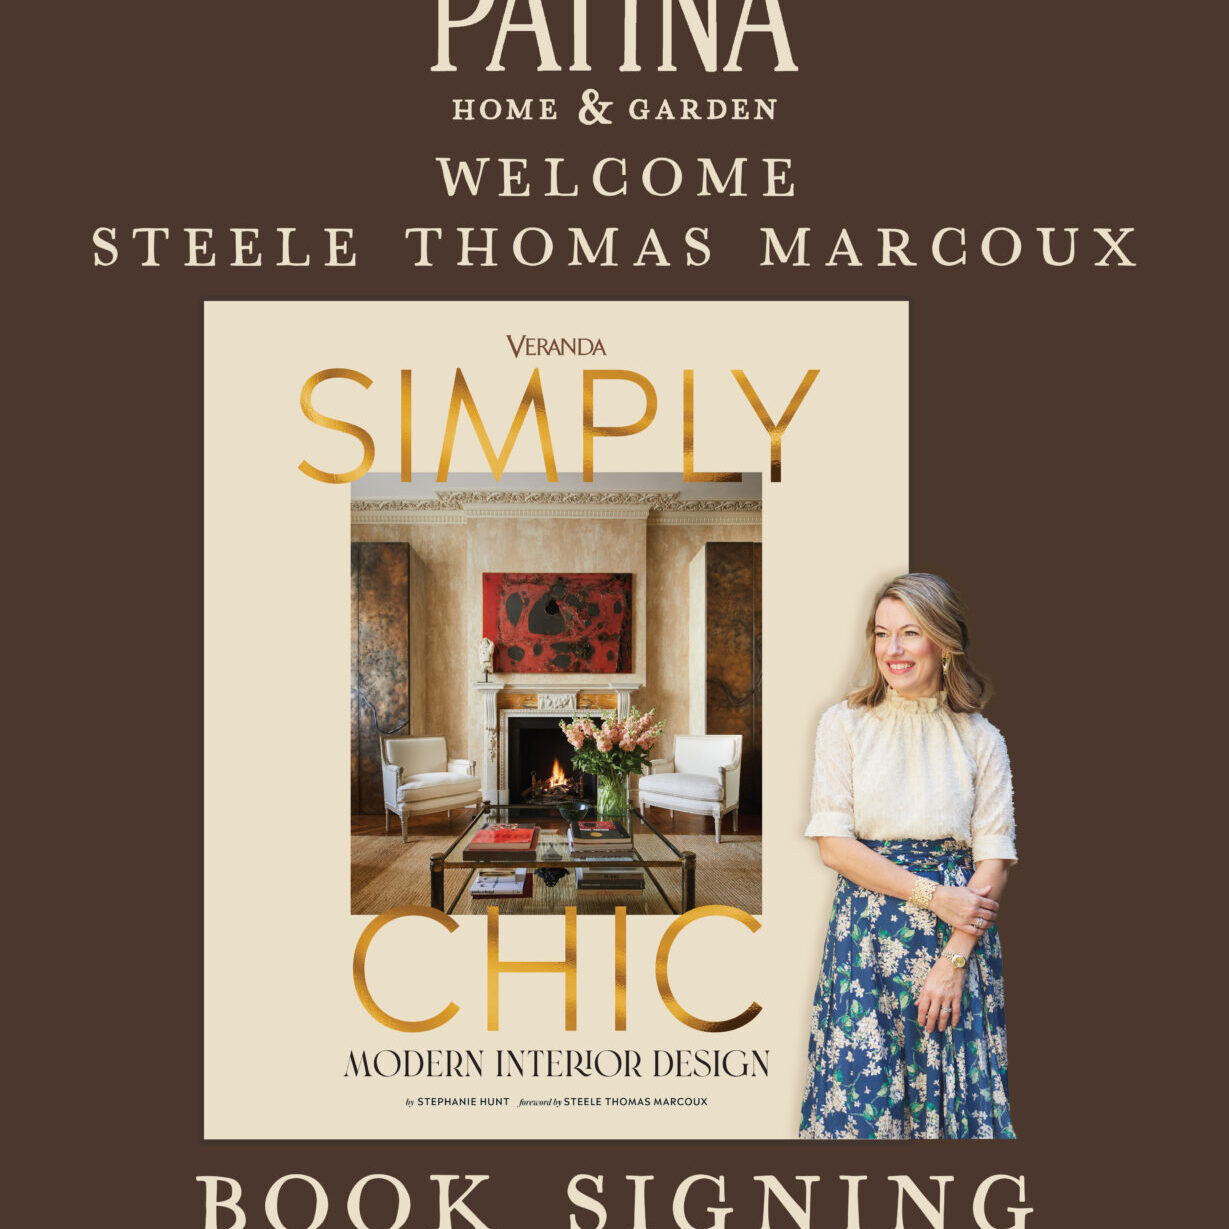 STeele Thomas Marcoux book signing at Patina. October 19th 2-5pm